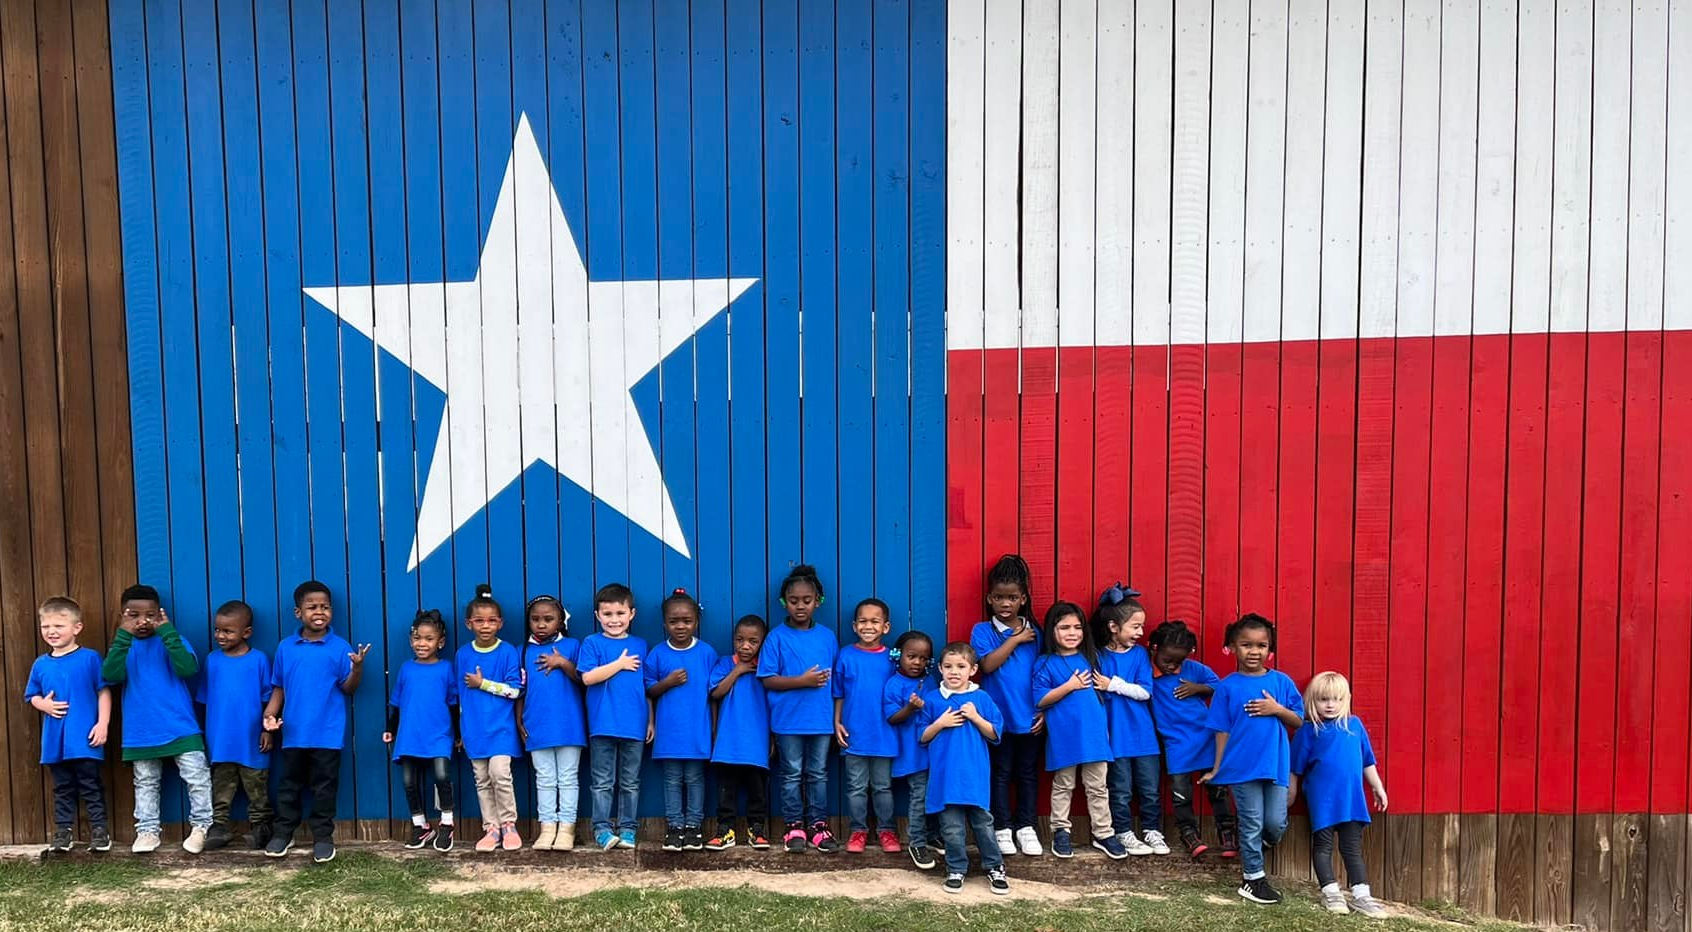 students standing by texas flag barn